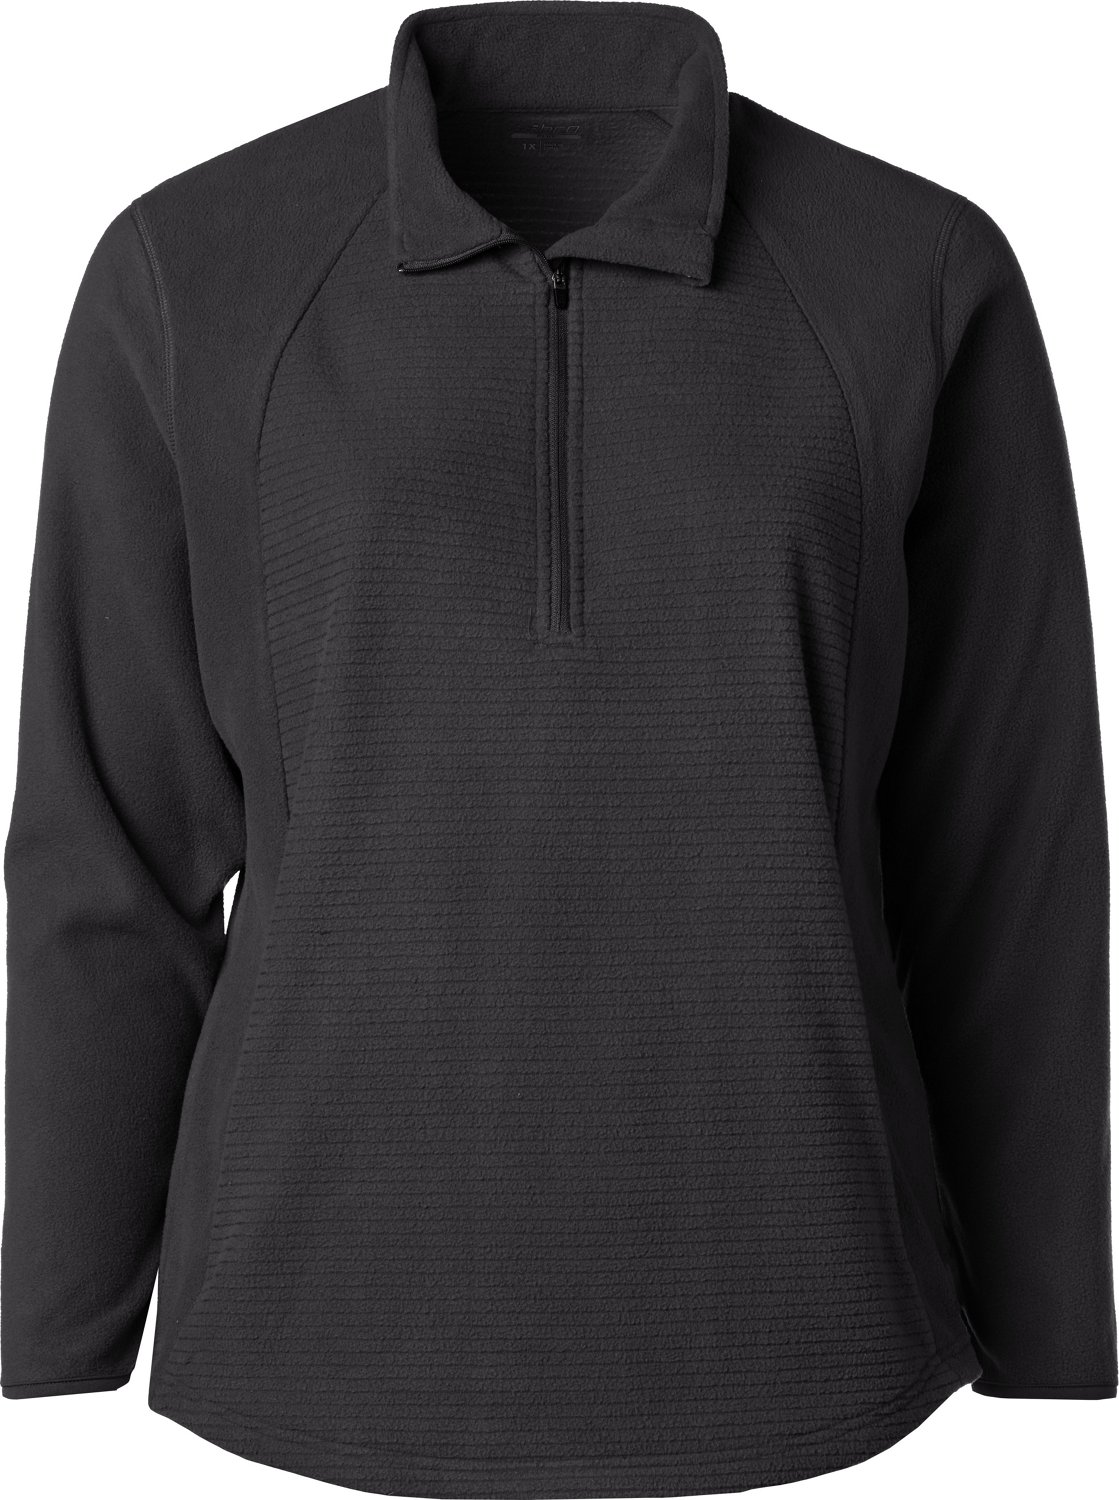 Zip-Front Microfleece Sweater Adaptive Clothing for Seniors